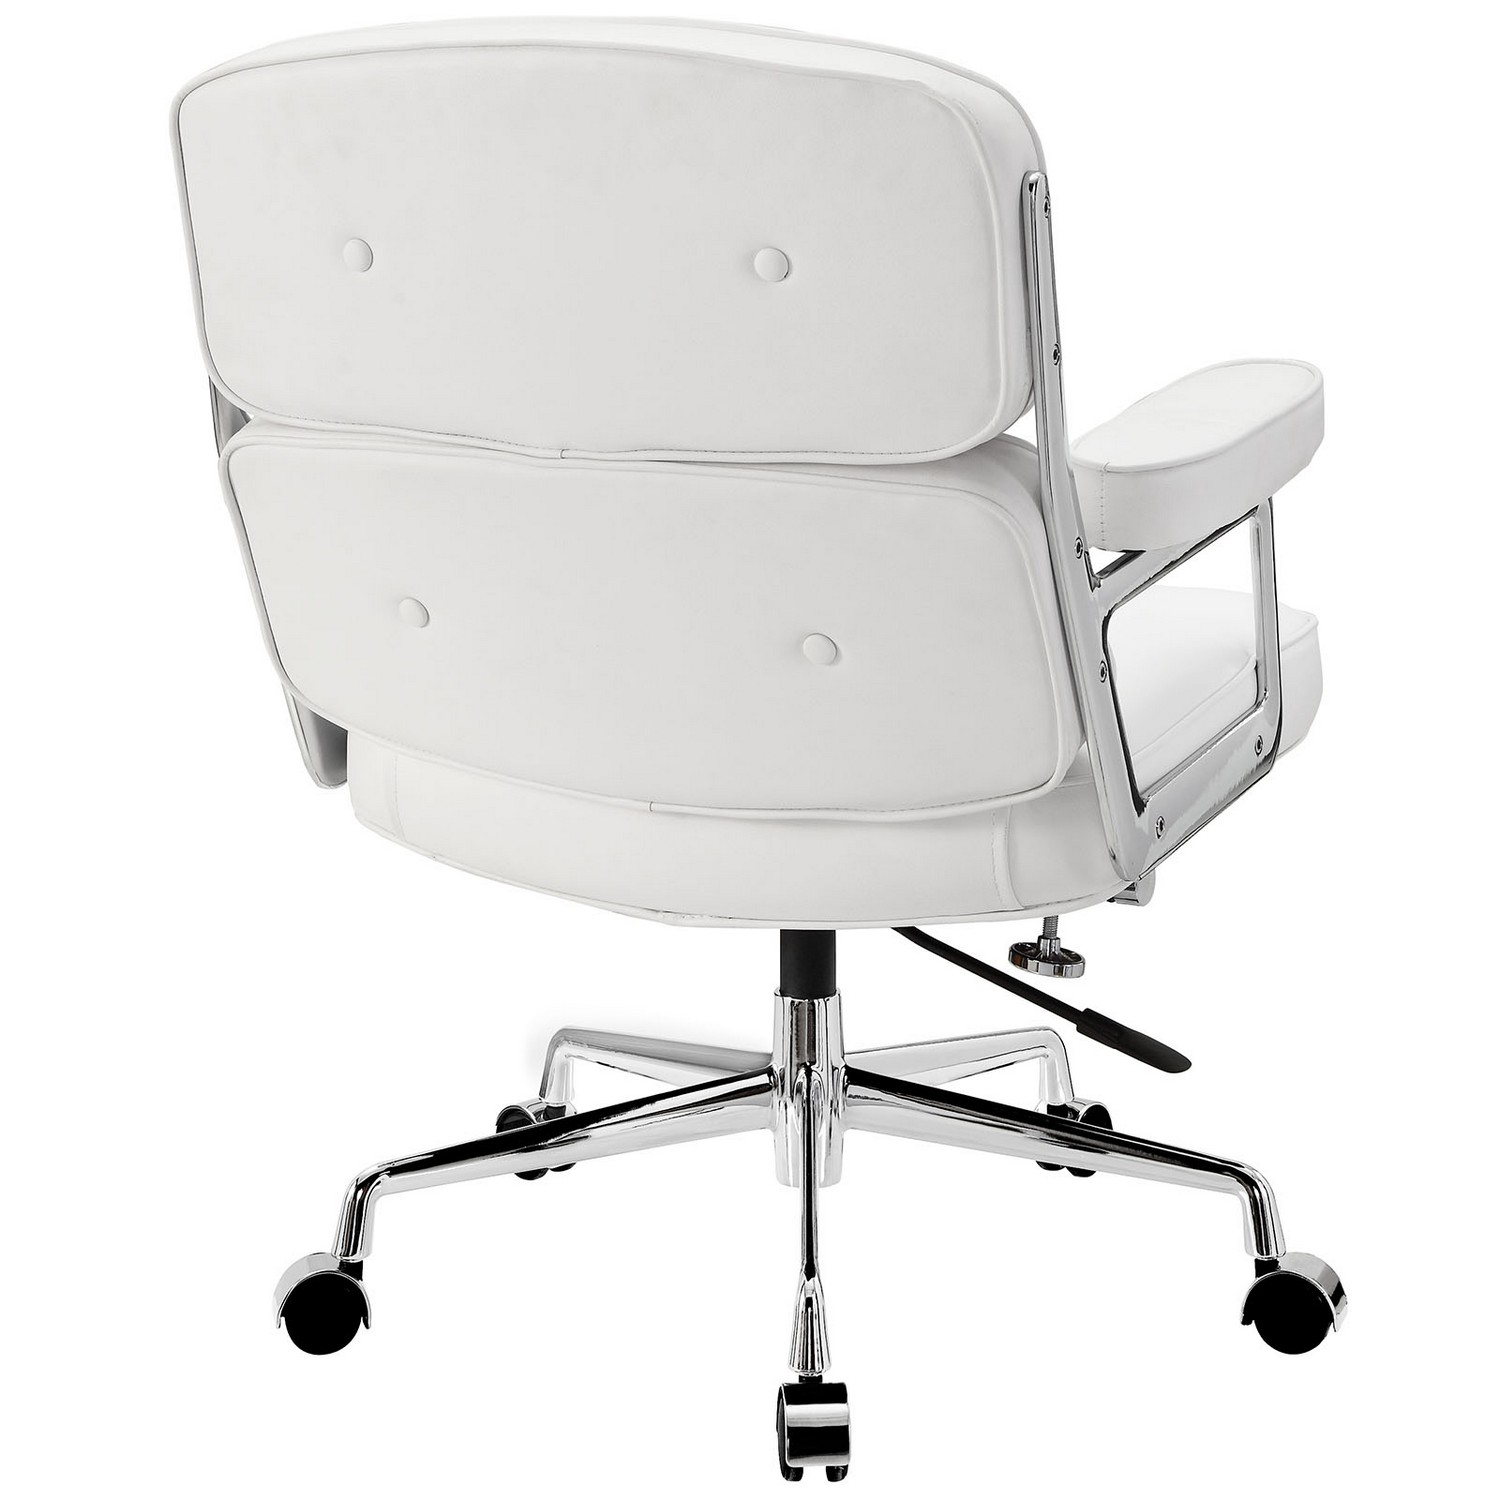 Modway Remix Office Chair - White